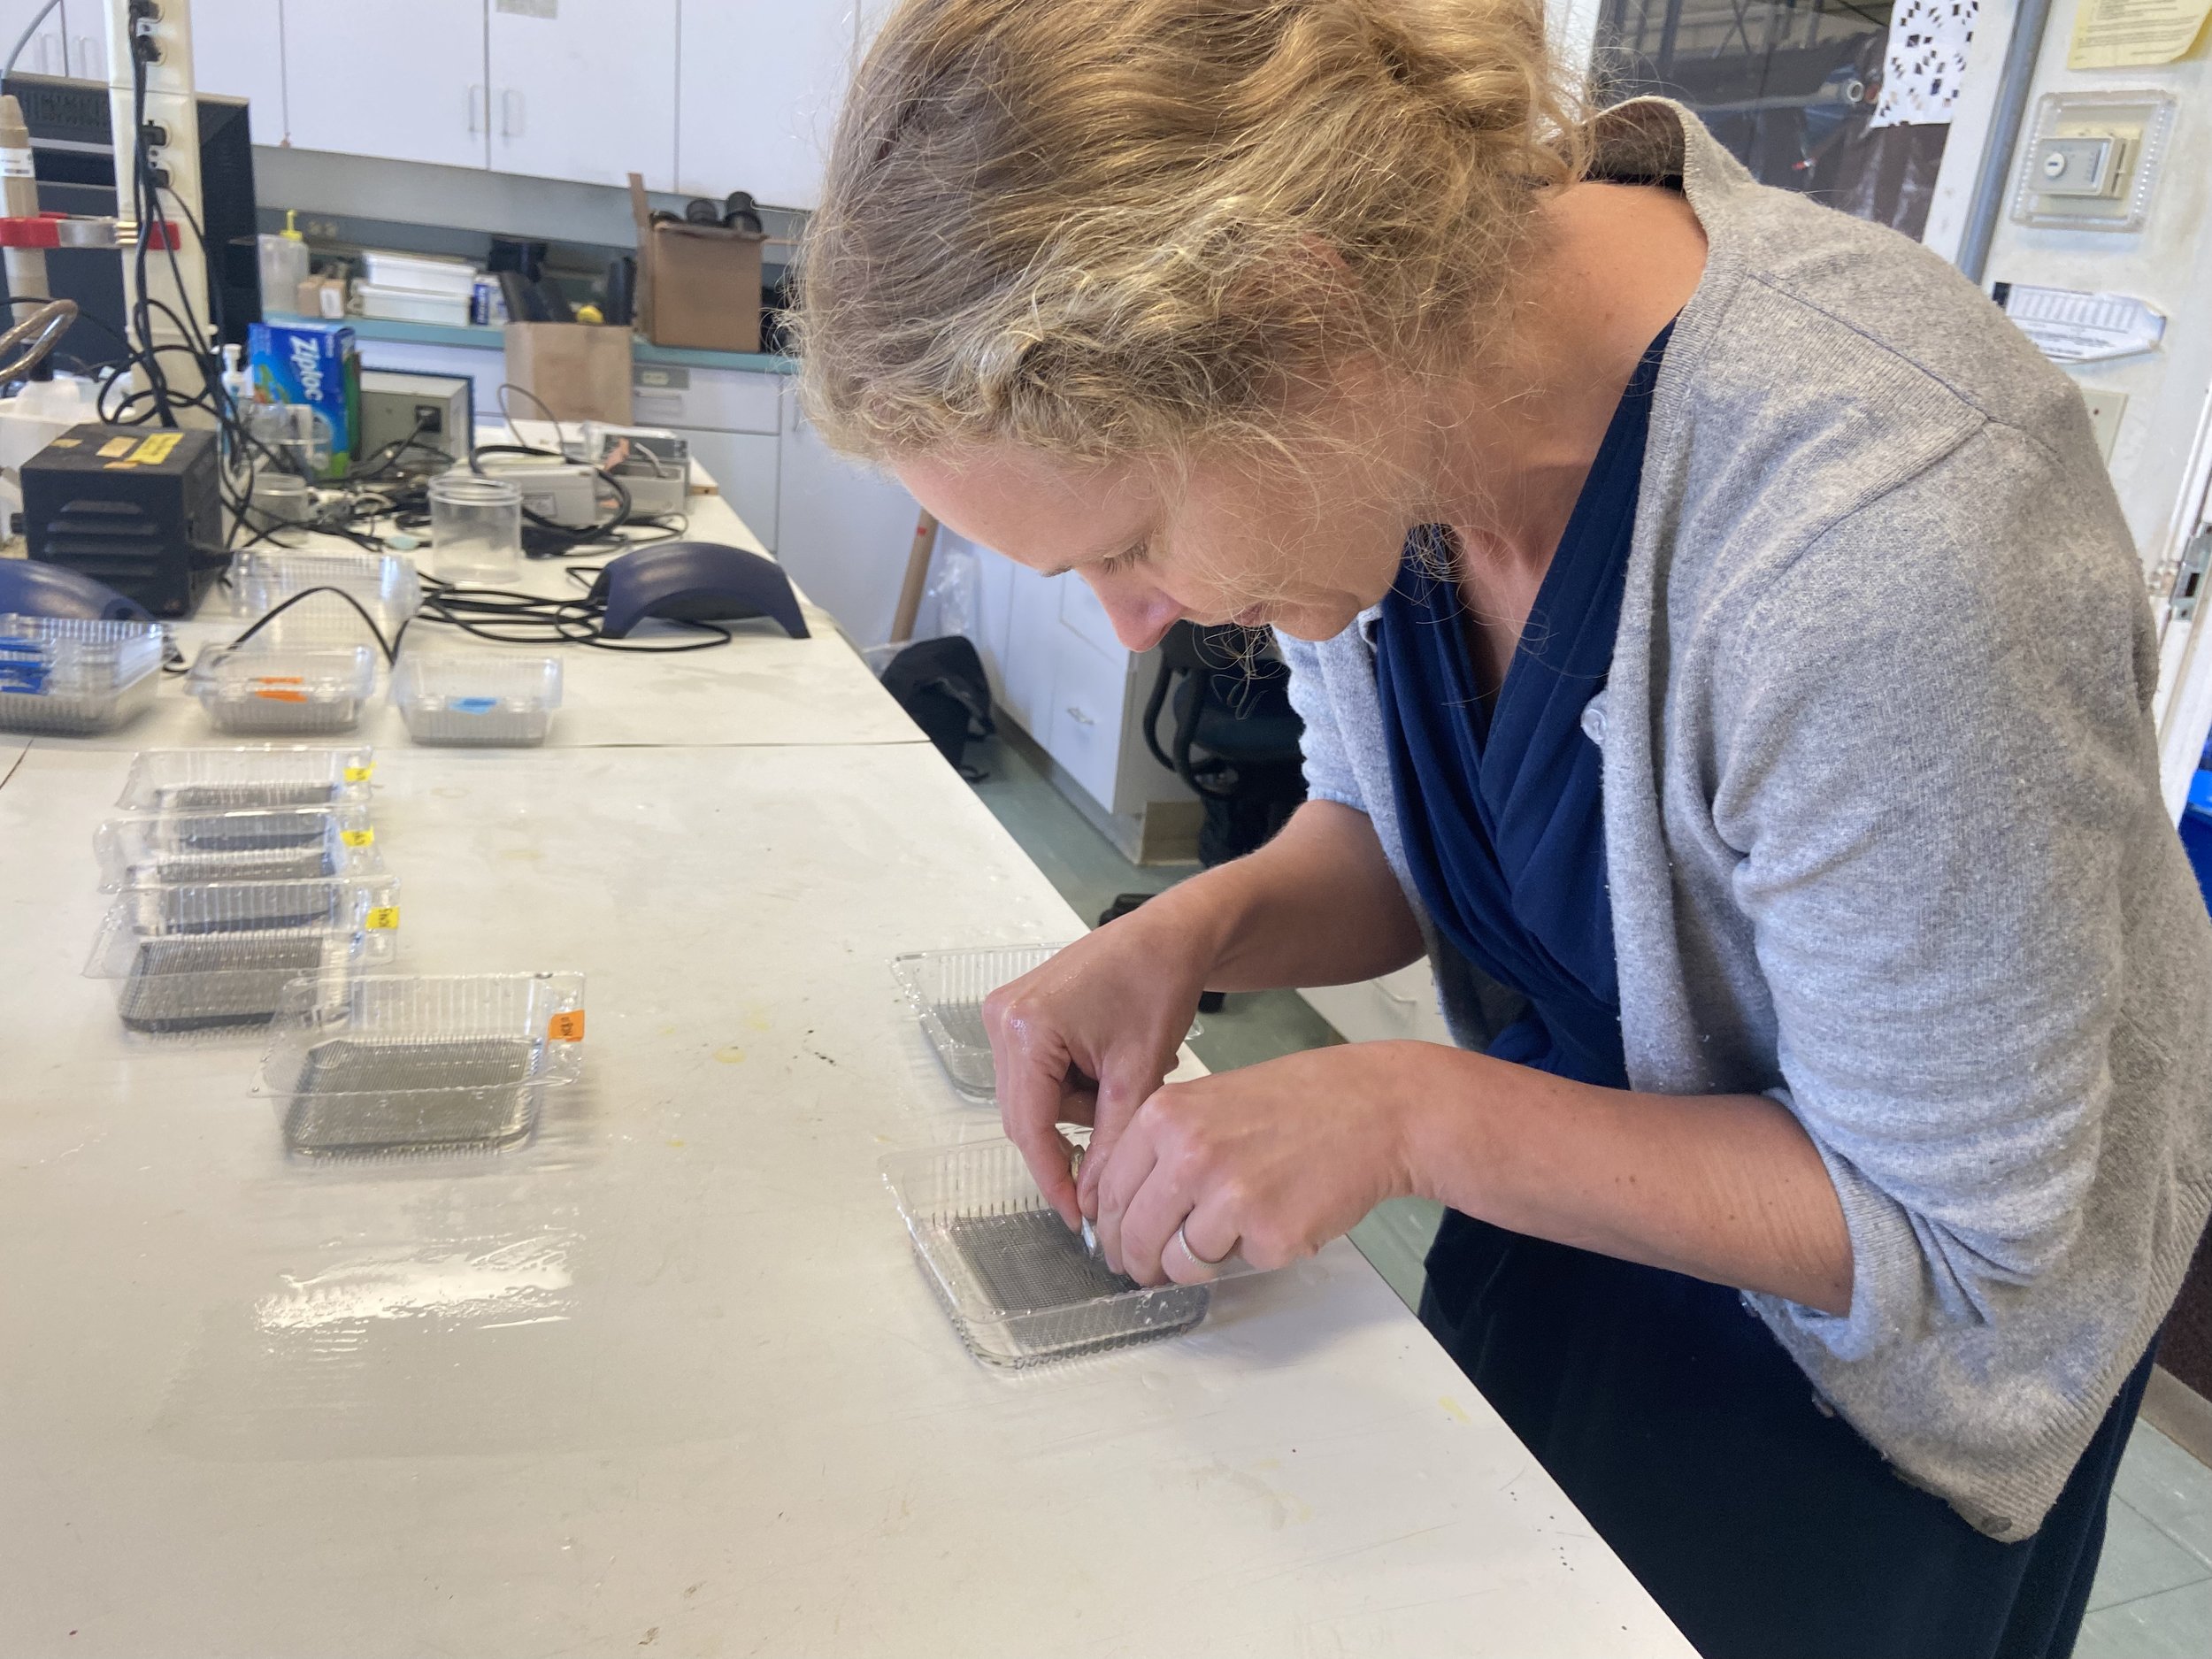  Fertilizing silverside embryos at the Rankin Lab at the University of Connecticut - Avery Point 